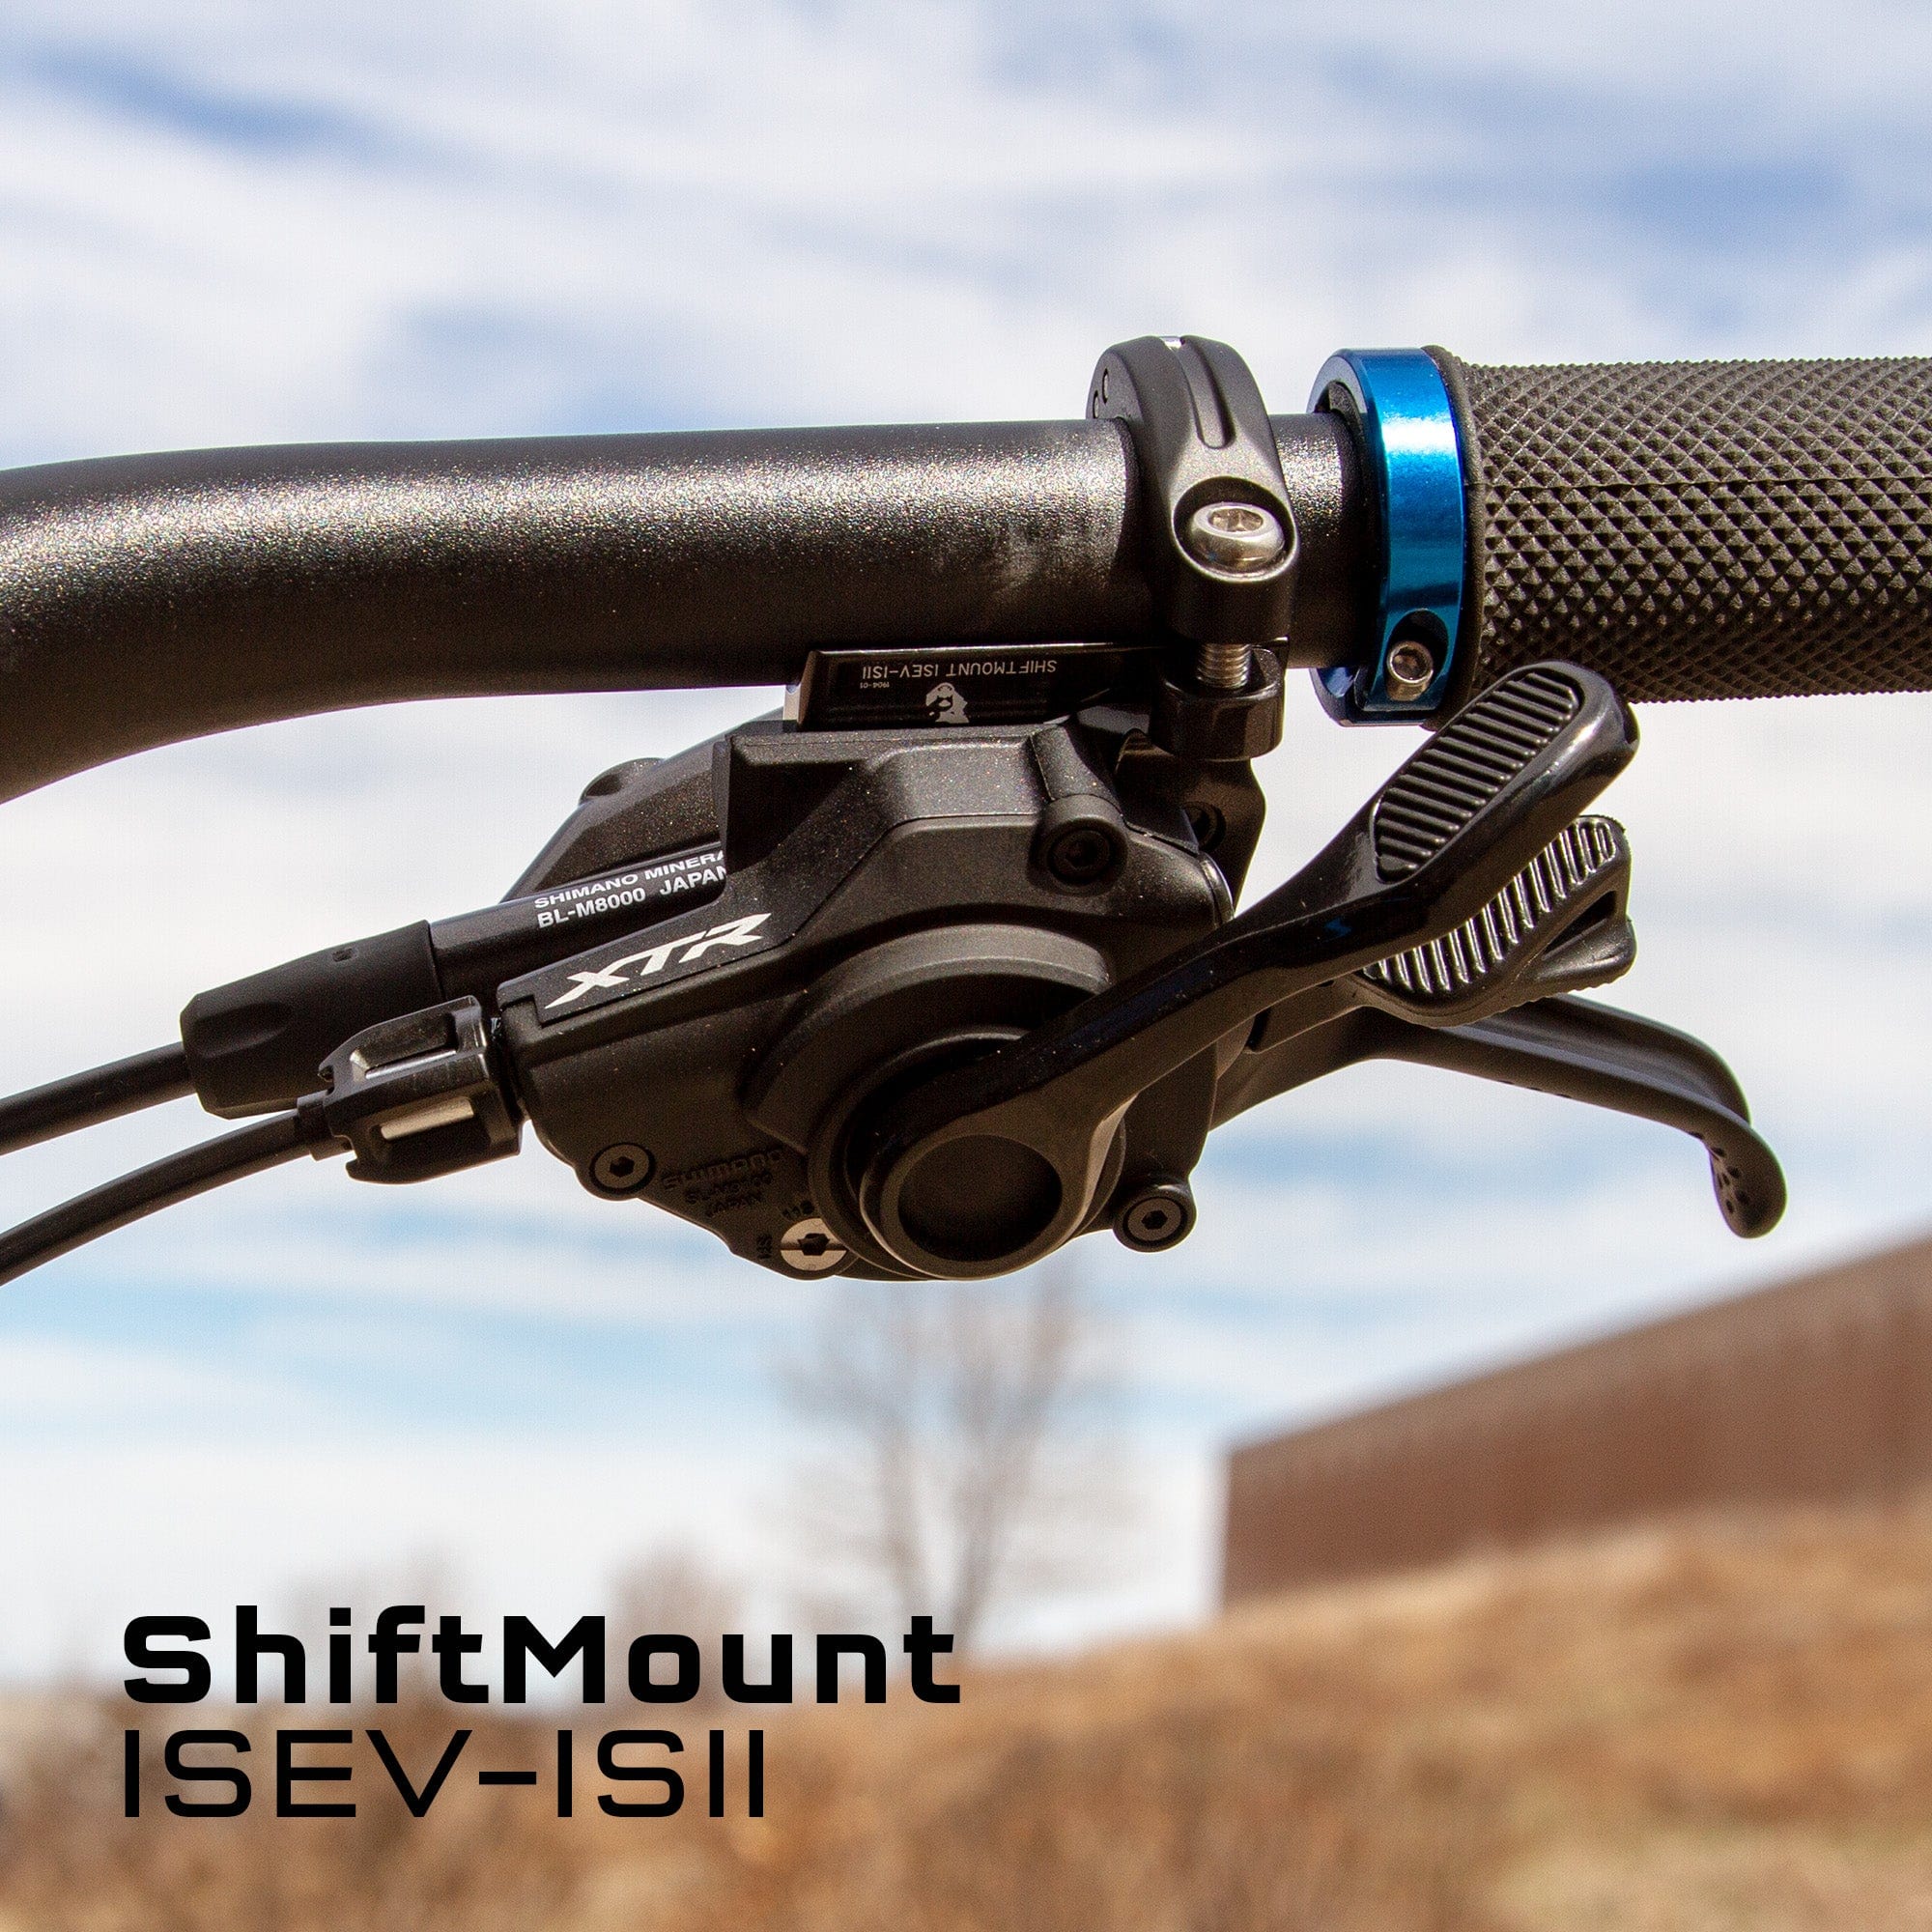 sram shifters with shimano brakes matchmaker